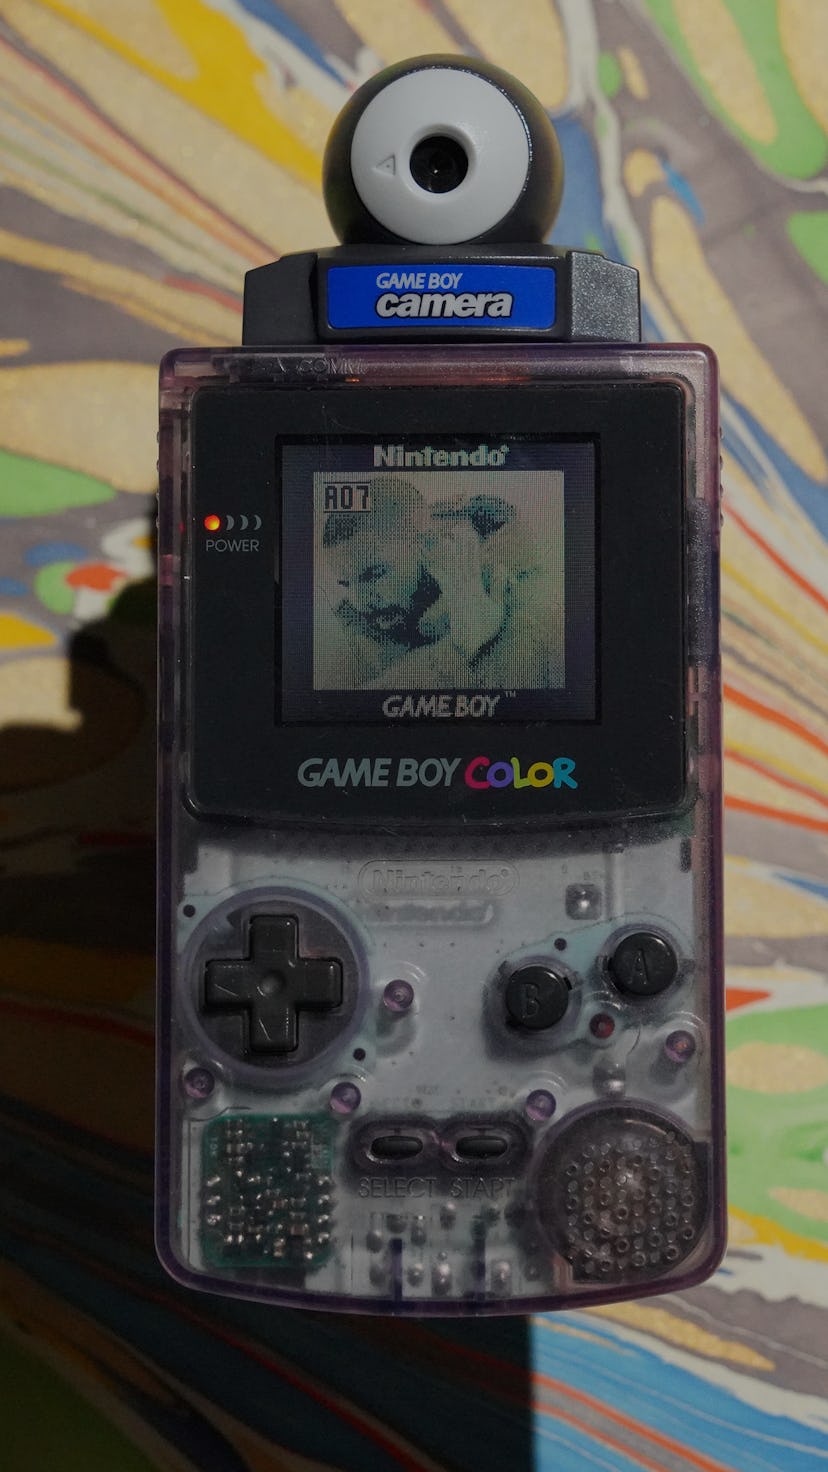 Game Boy Camera review: Reviewing the Nintendo's 23-year-old toy camera in 2021